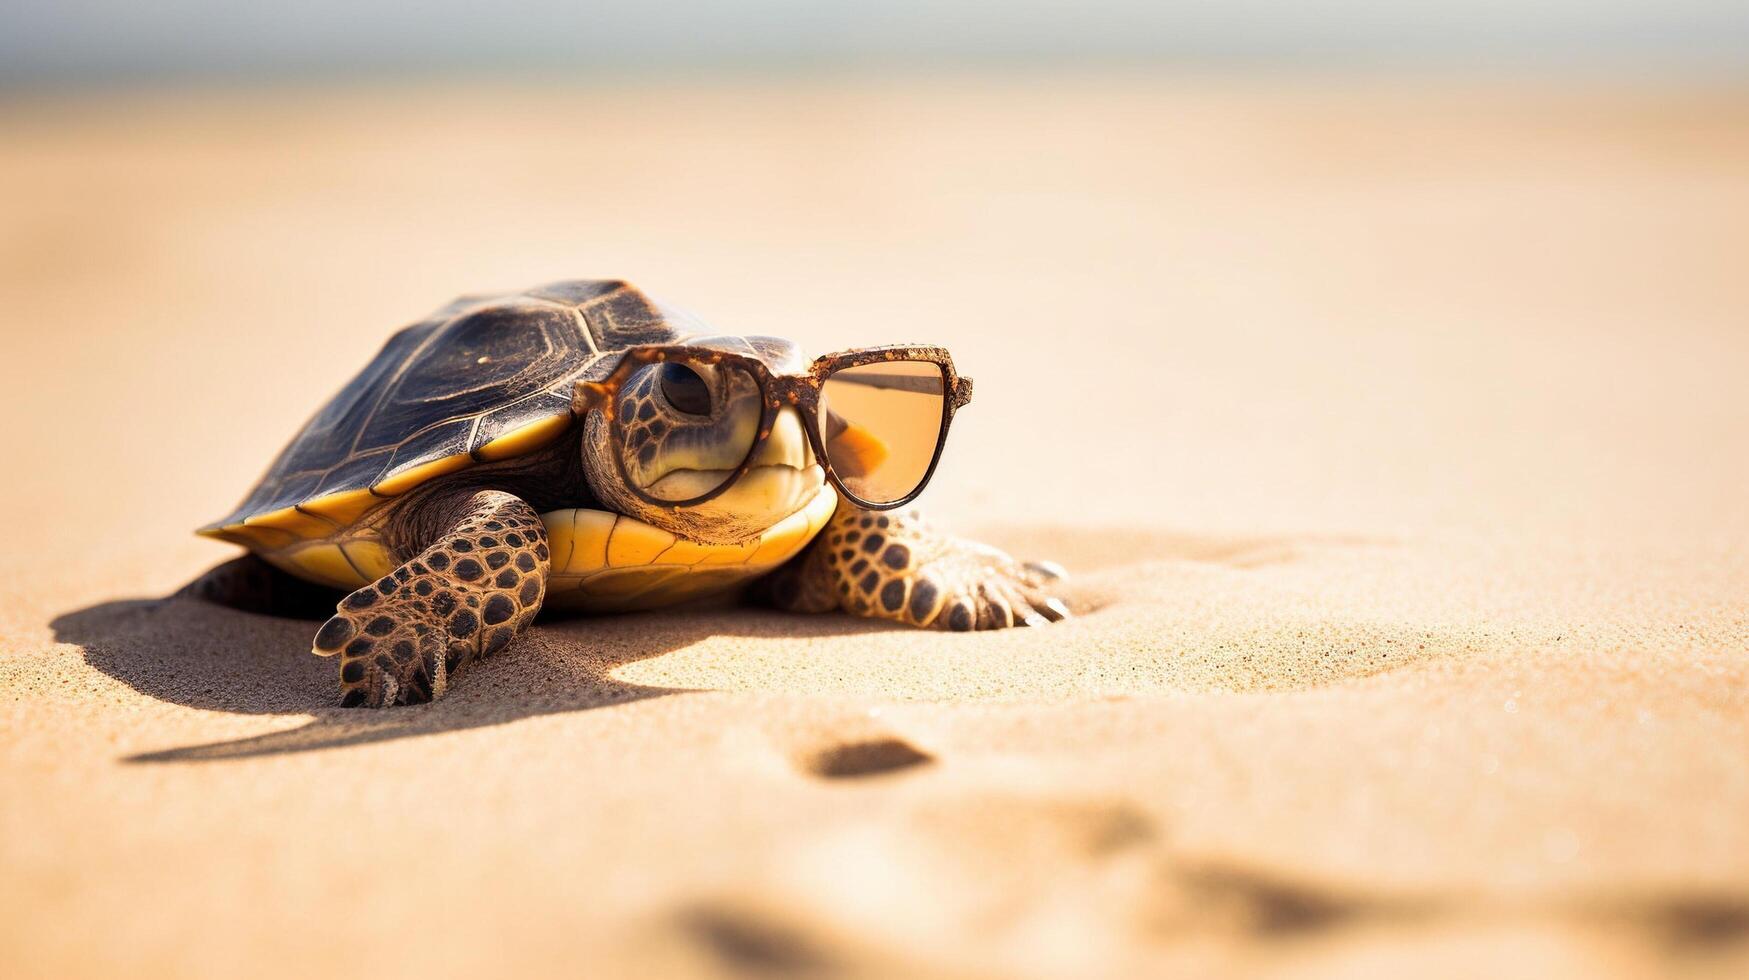 turtle on the beach with sunglasses photo